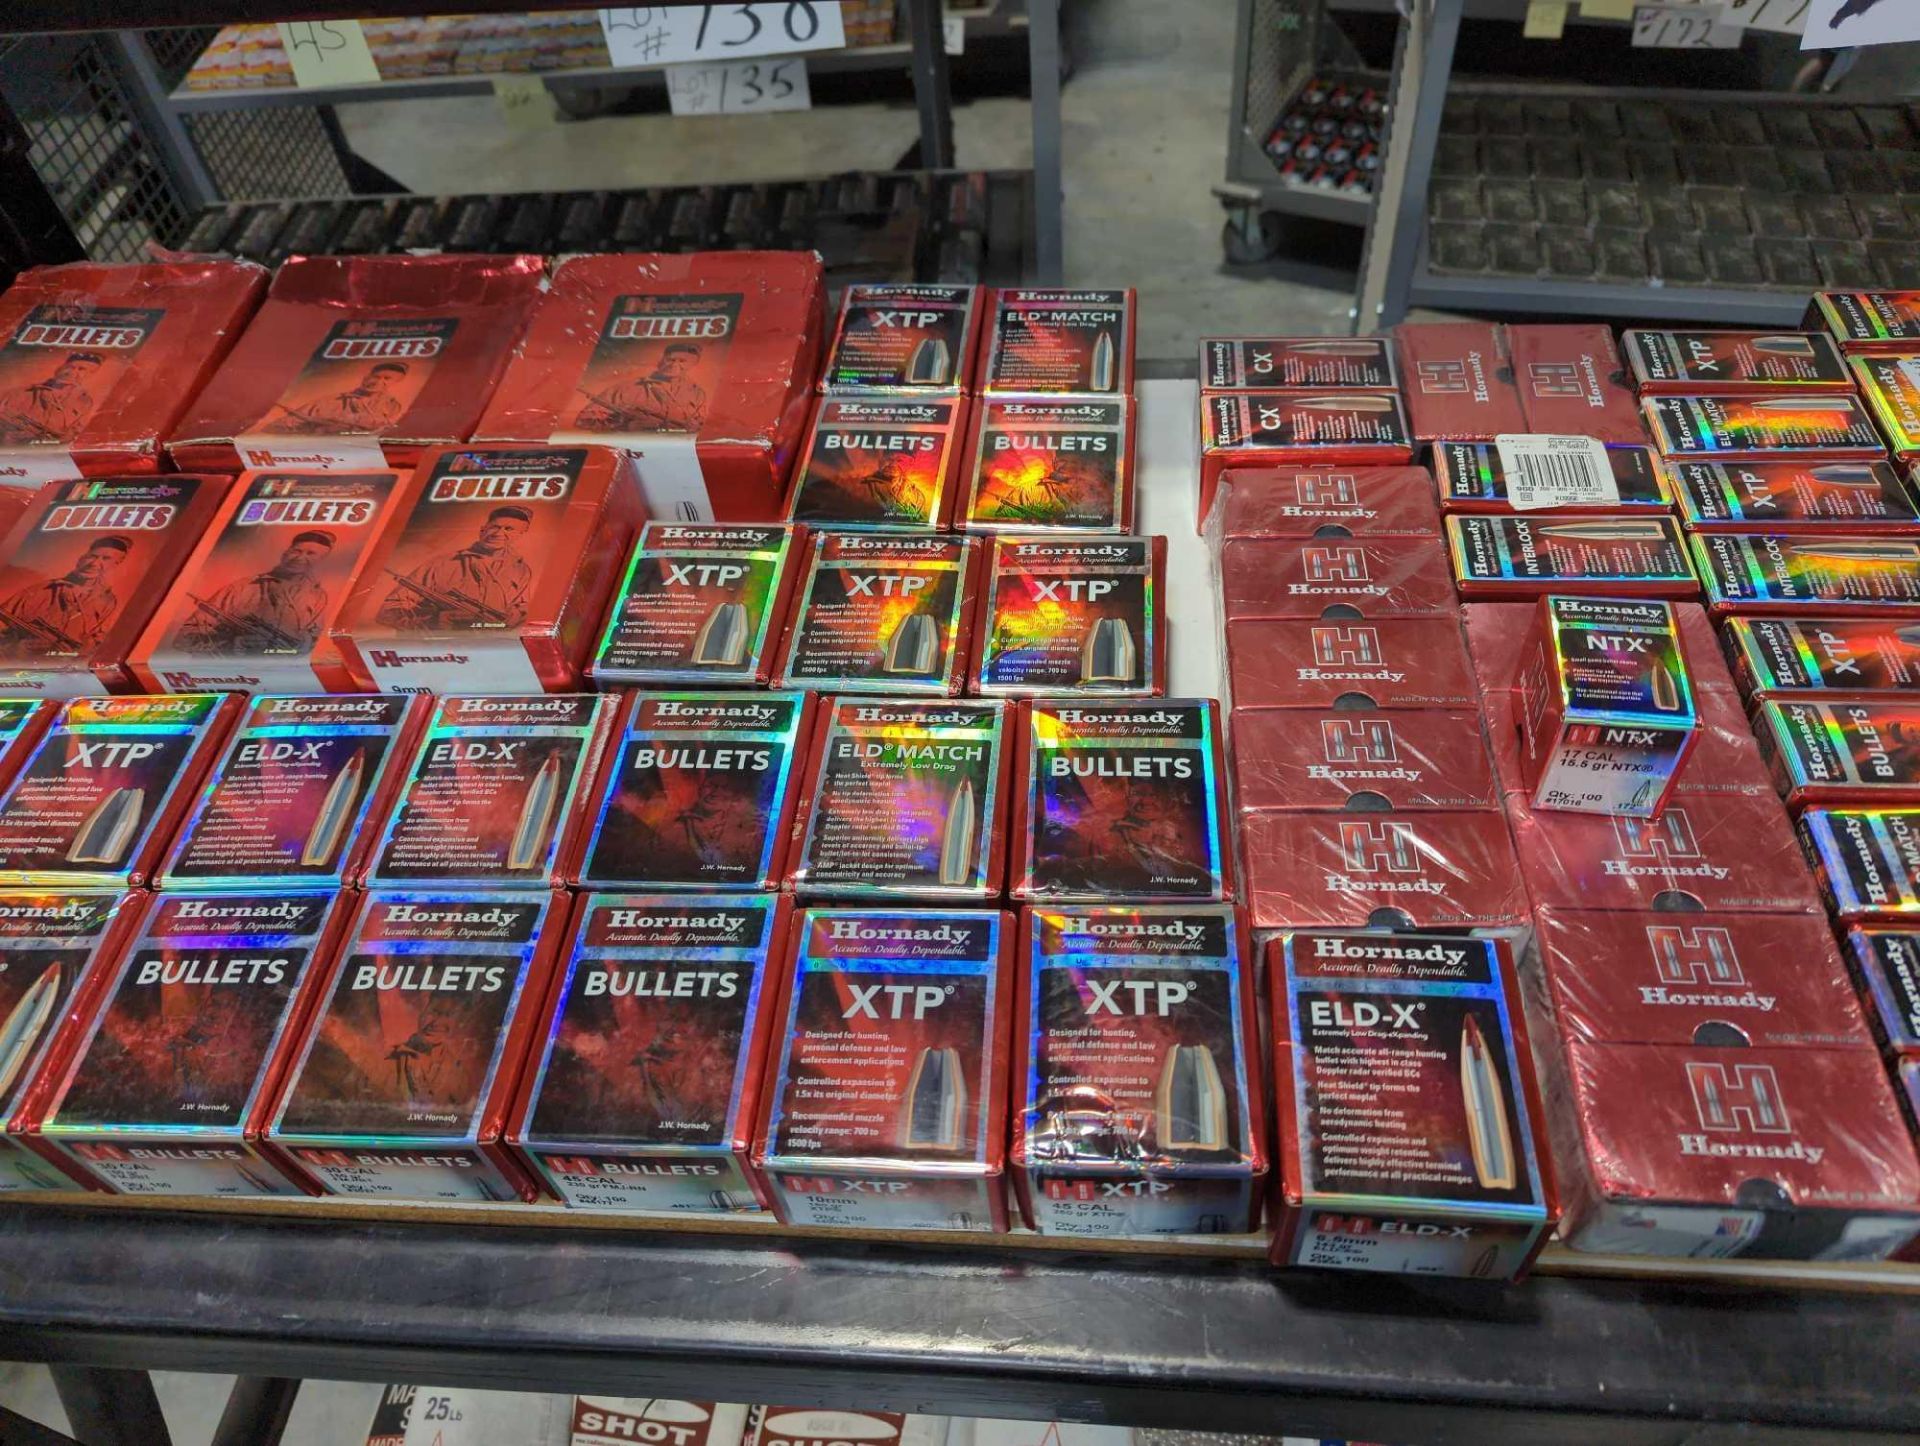 Shelf of Hornady: 54, 45, 35, 30, 10mm, 6.5mm, 17, 22, 38, and 7.62x39 - Image 3 of 8